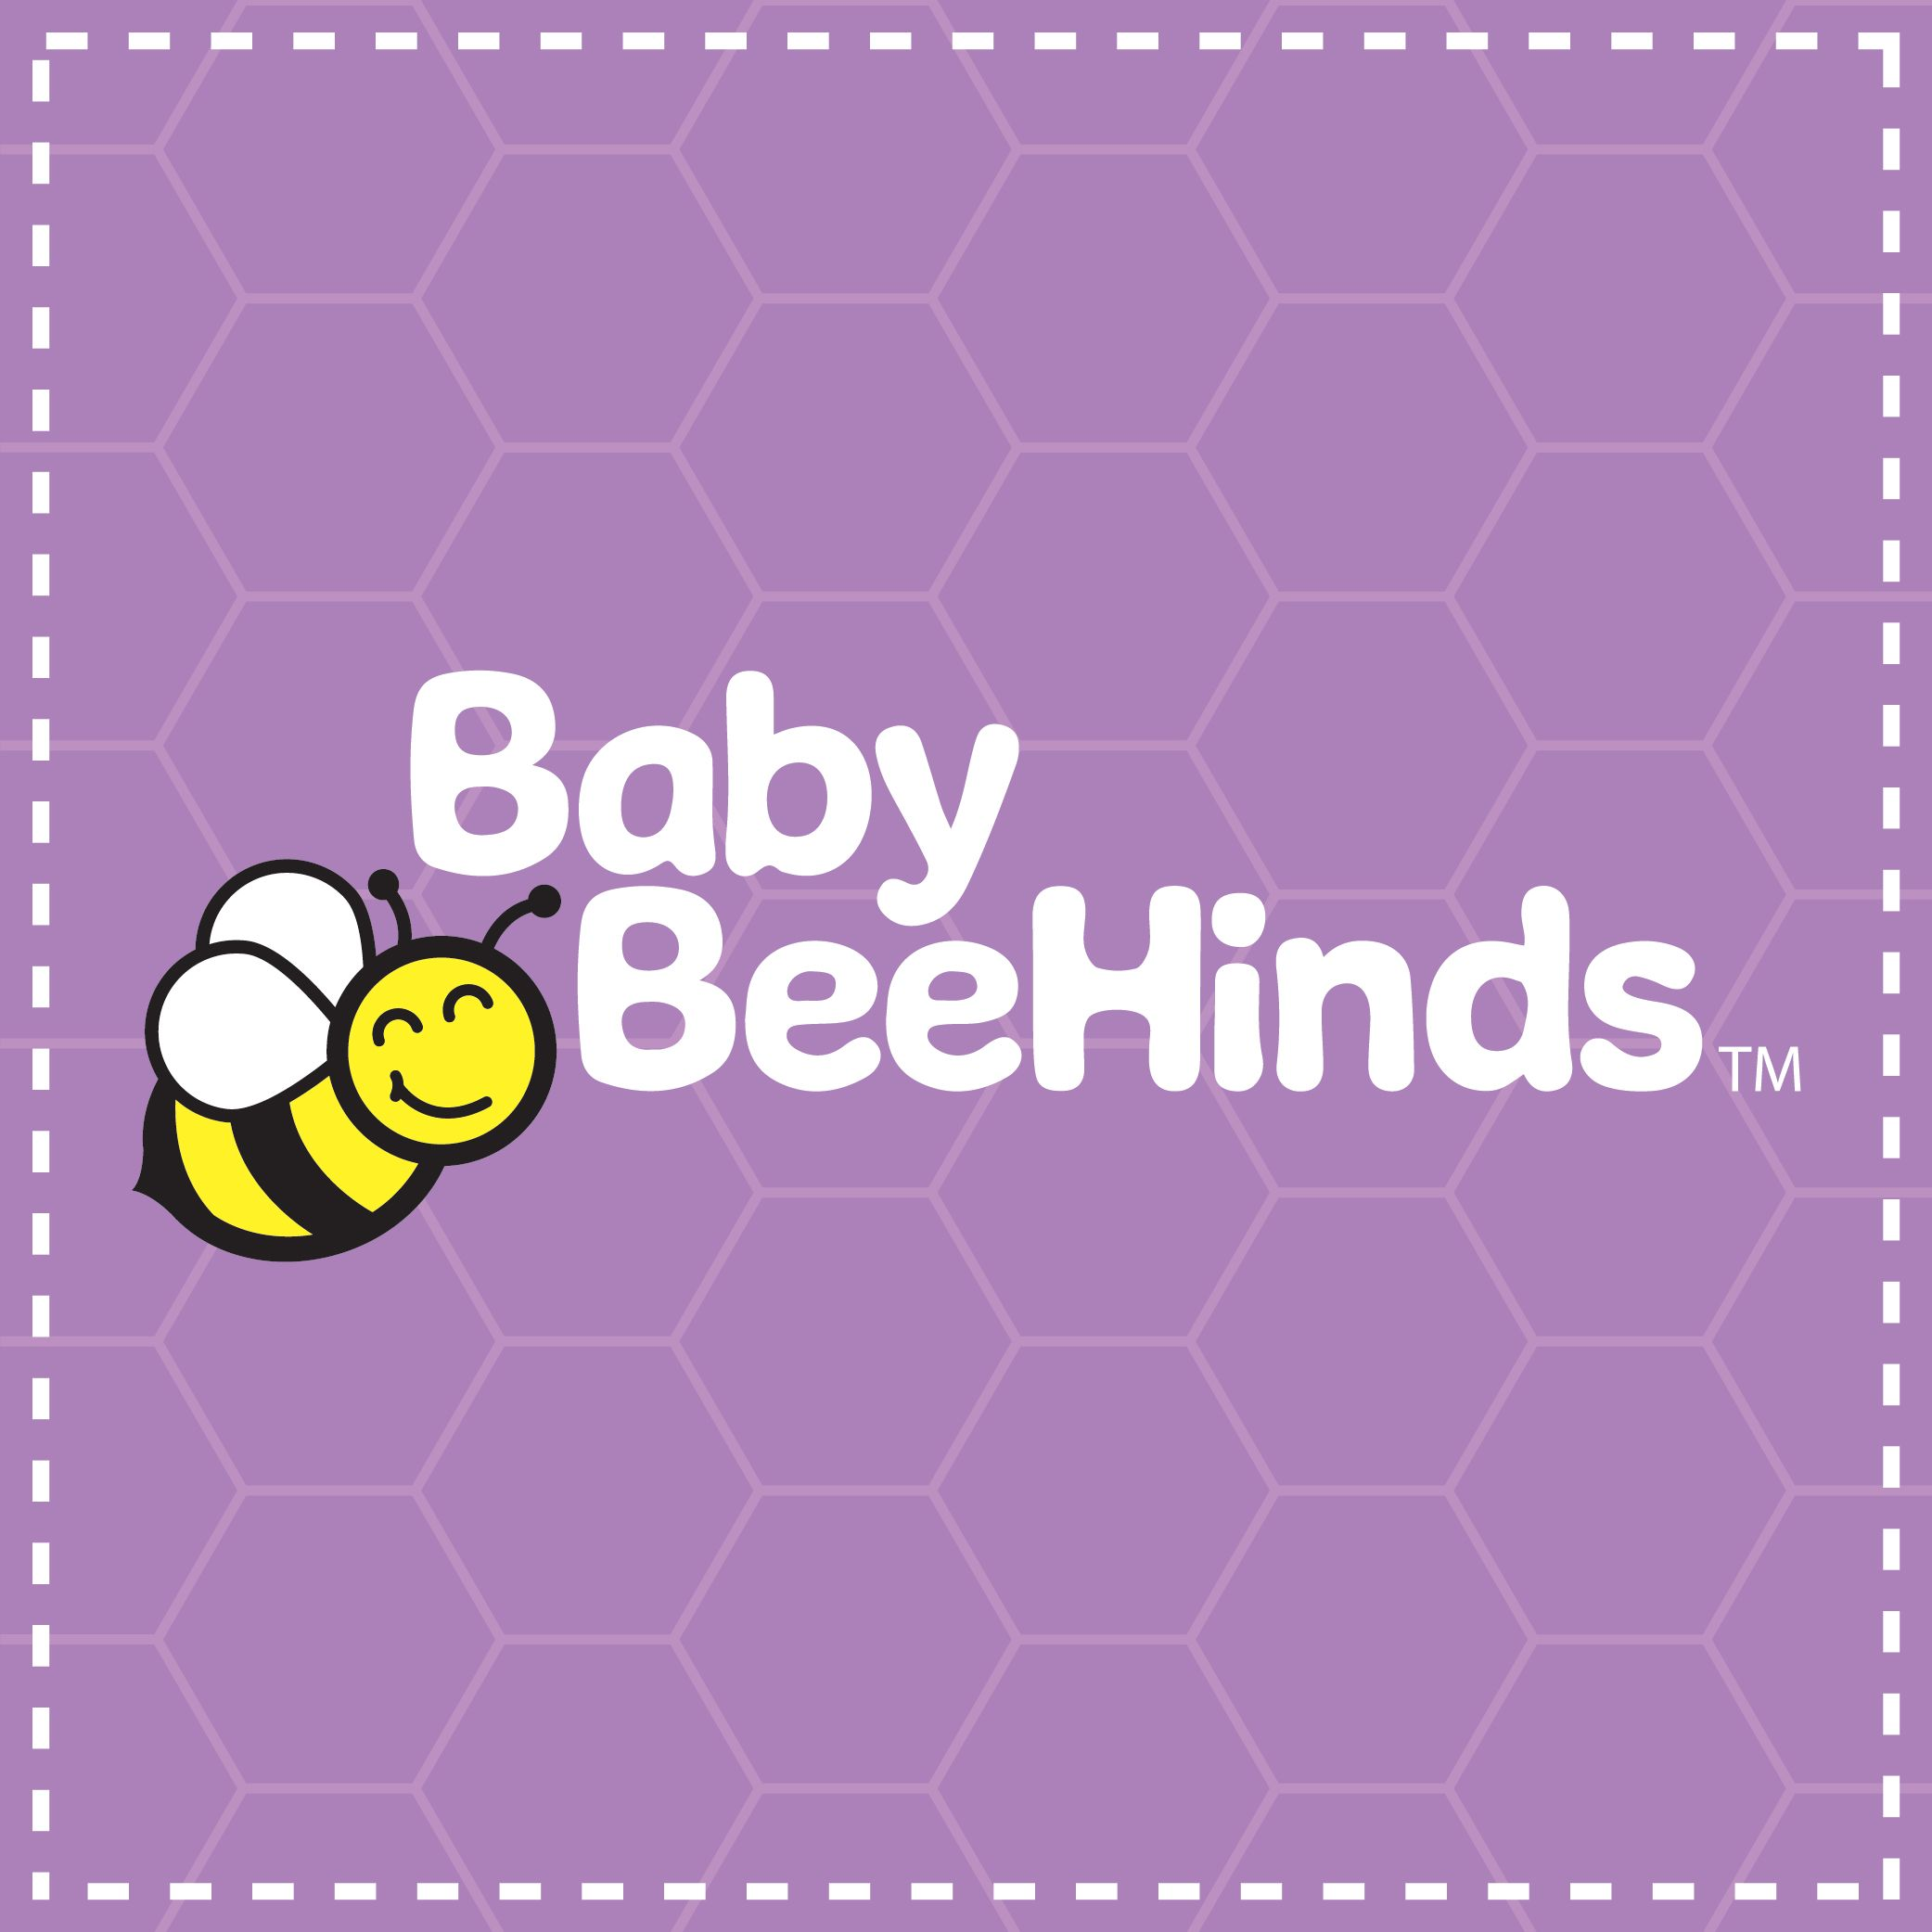 Baby Beehinds | Cloth & Carry